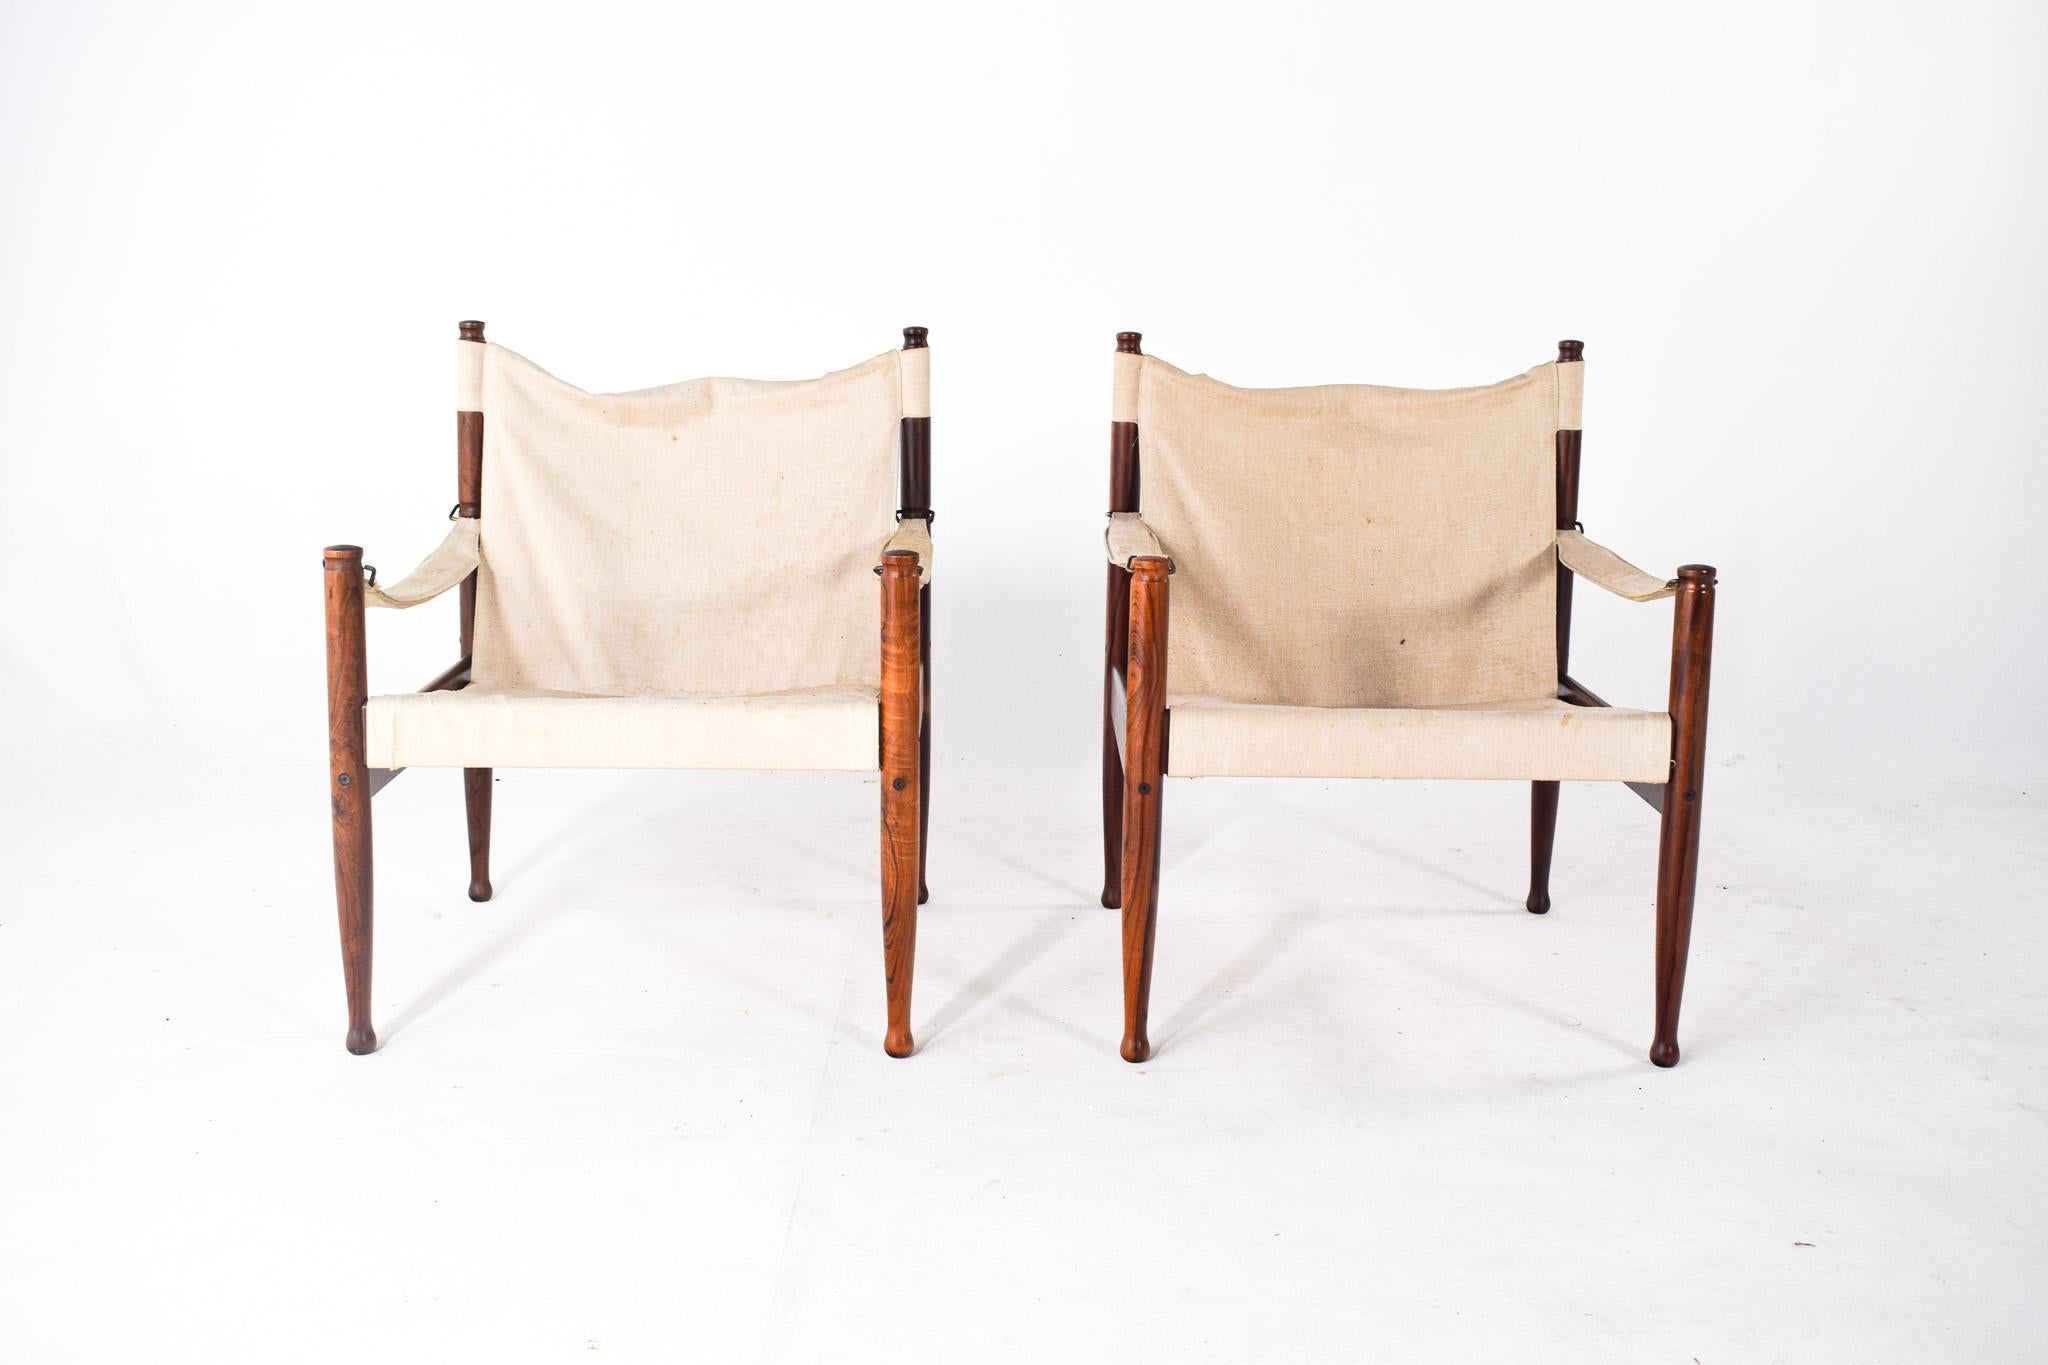 The image depicts a pair of Danish mid-century ‘safari’ chairs, which are iconic in their simplistic yet elegant design. They were designed by Erik Wørts for Niels Eilersen and are recognized as model number 30, a product of the 1960s. These chairs